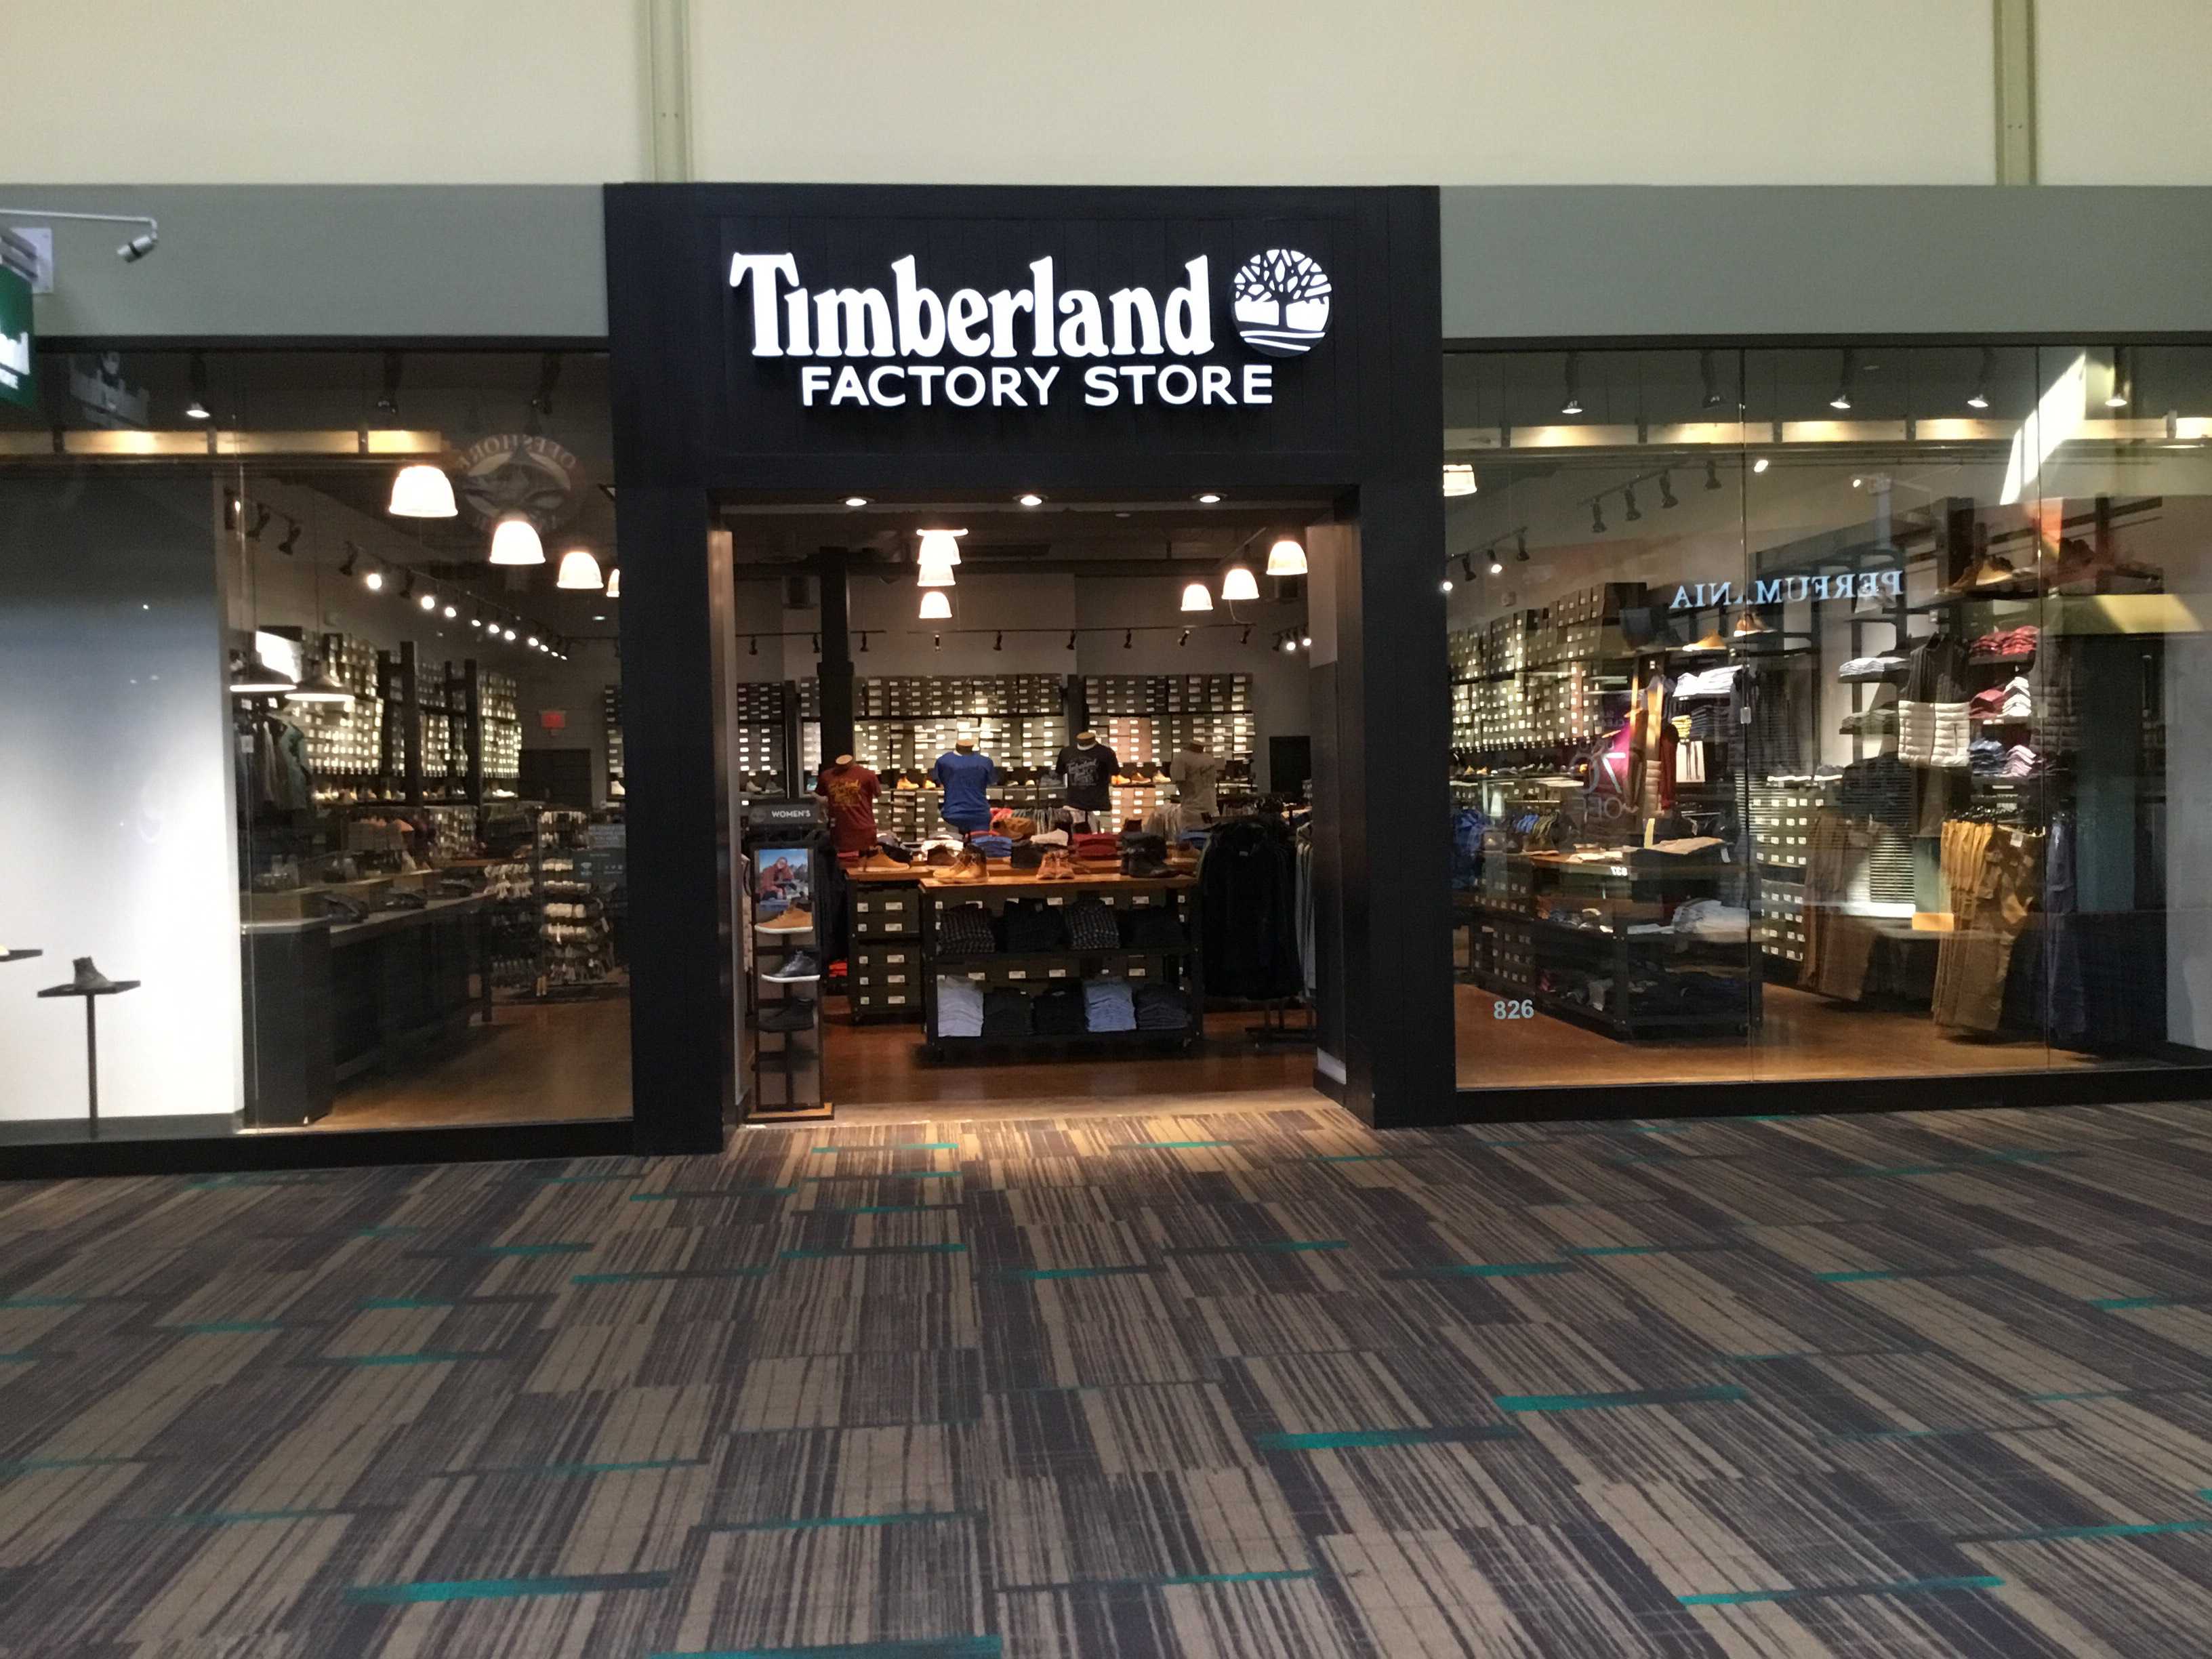 nearest timberland store to me